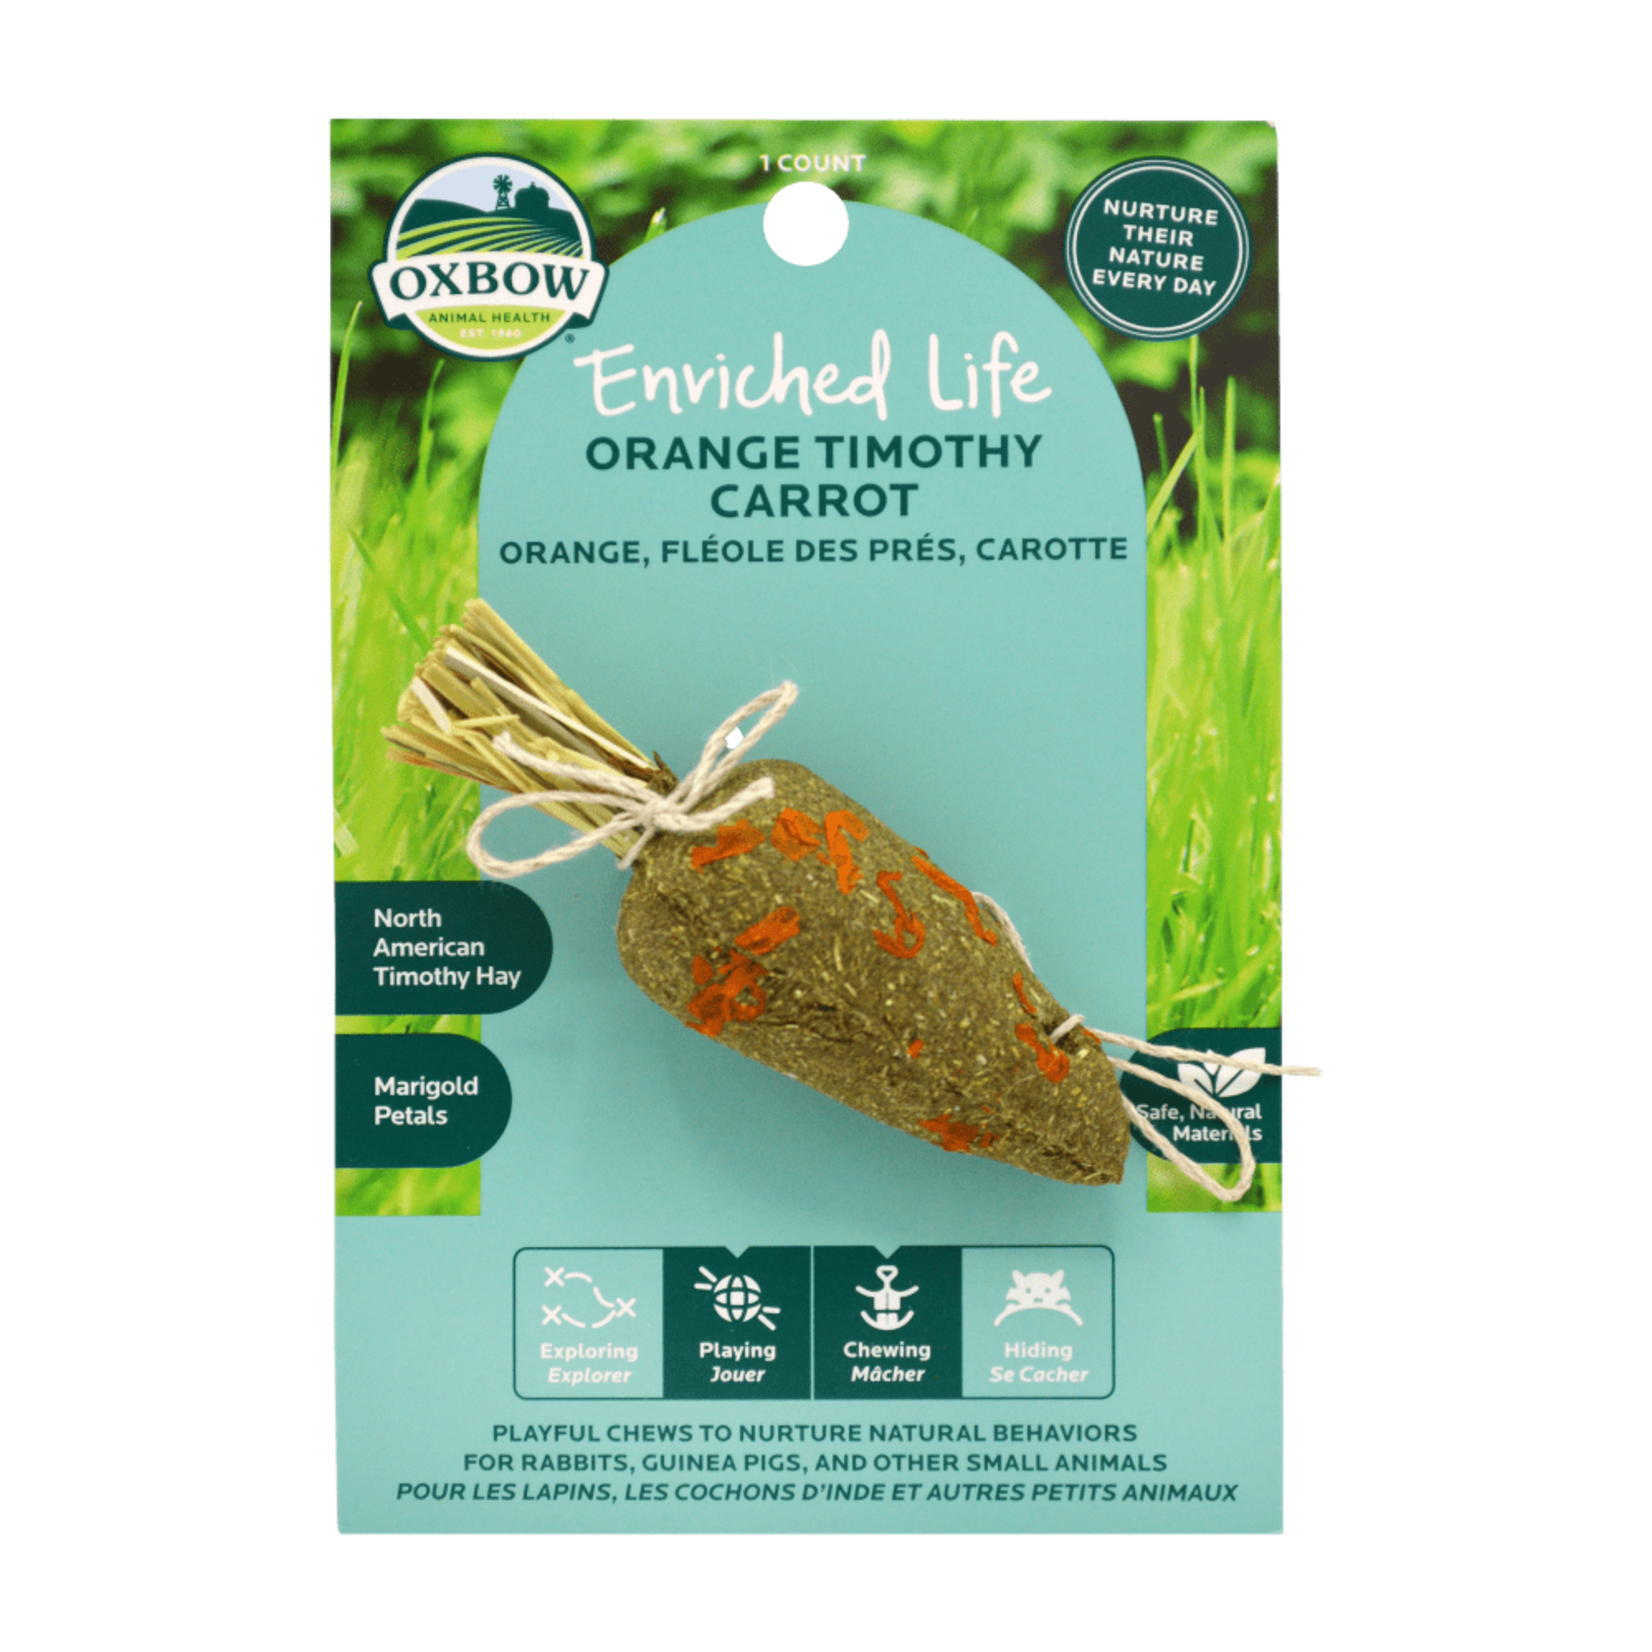 Oxbow Animal Health Enriched Life Orange Timothy Carrot